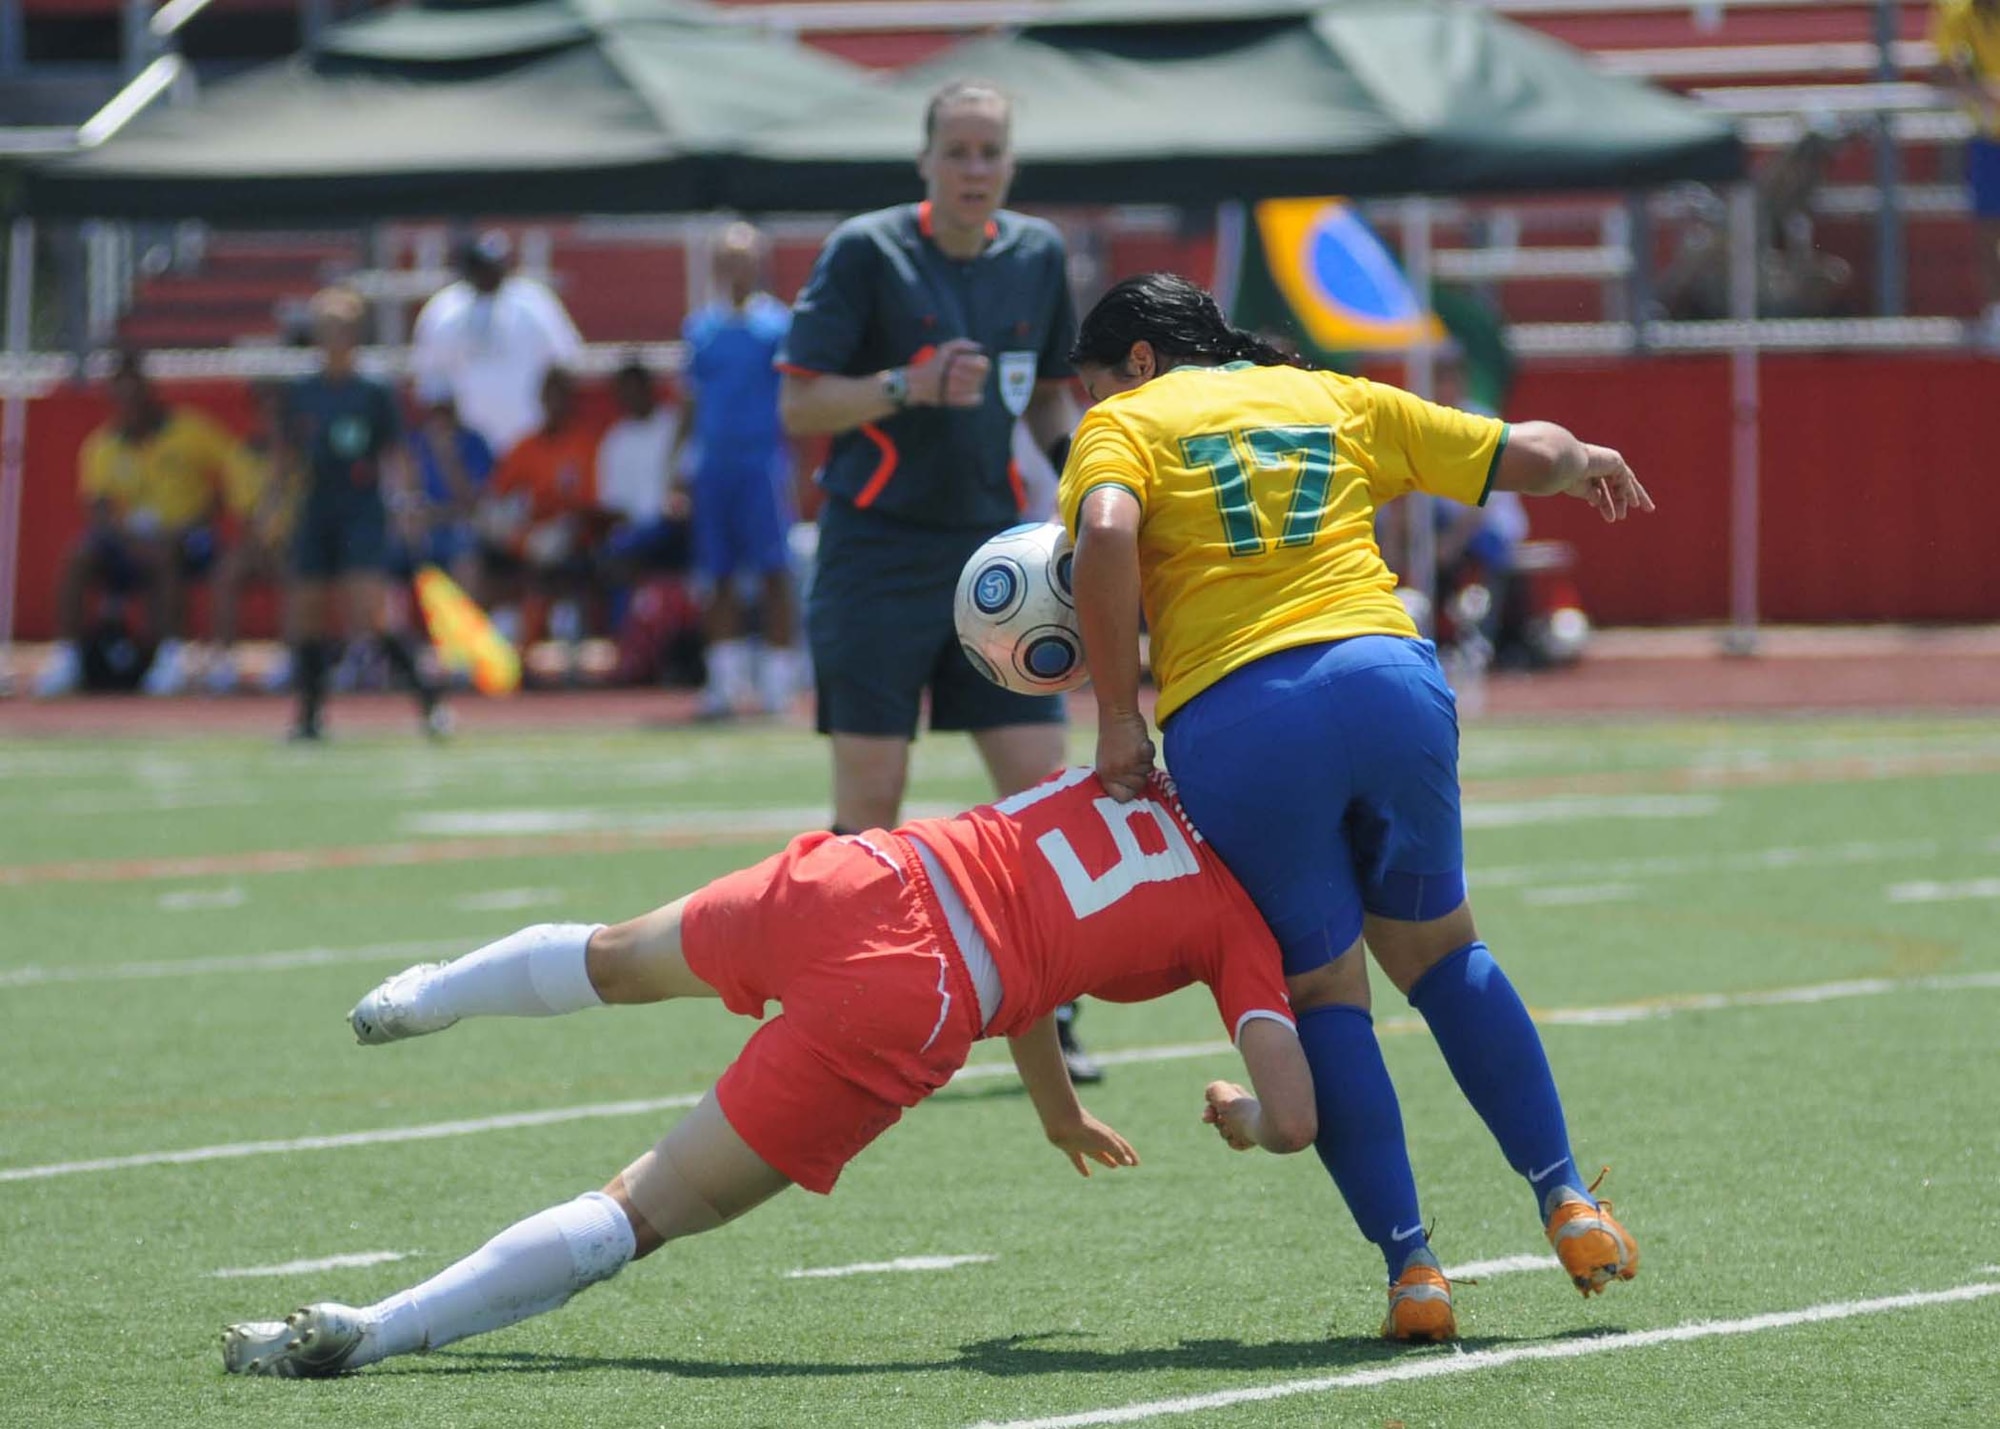 Brazil won the gold medal over the Republic of Korea, 1-0, in the championship game of the 5th CISM Women’s Soccer Championship at the Biloxi High Stadium, June 13.  The Netherlands won the bronze medal.  The CISM tournament, hosted by Keesler Air Force Base, also included teams from Germany, Canada, France and the United States.   (U.S. Air Force photo by Kemberly Groue)